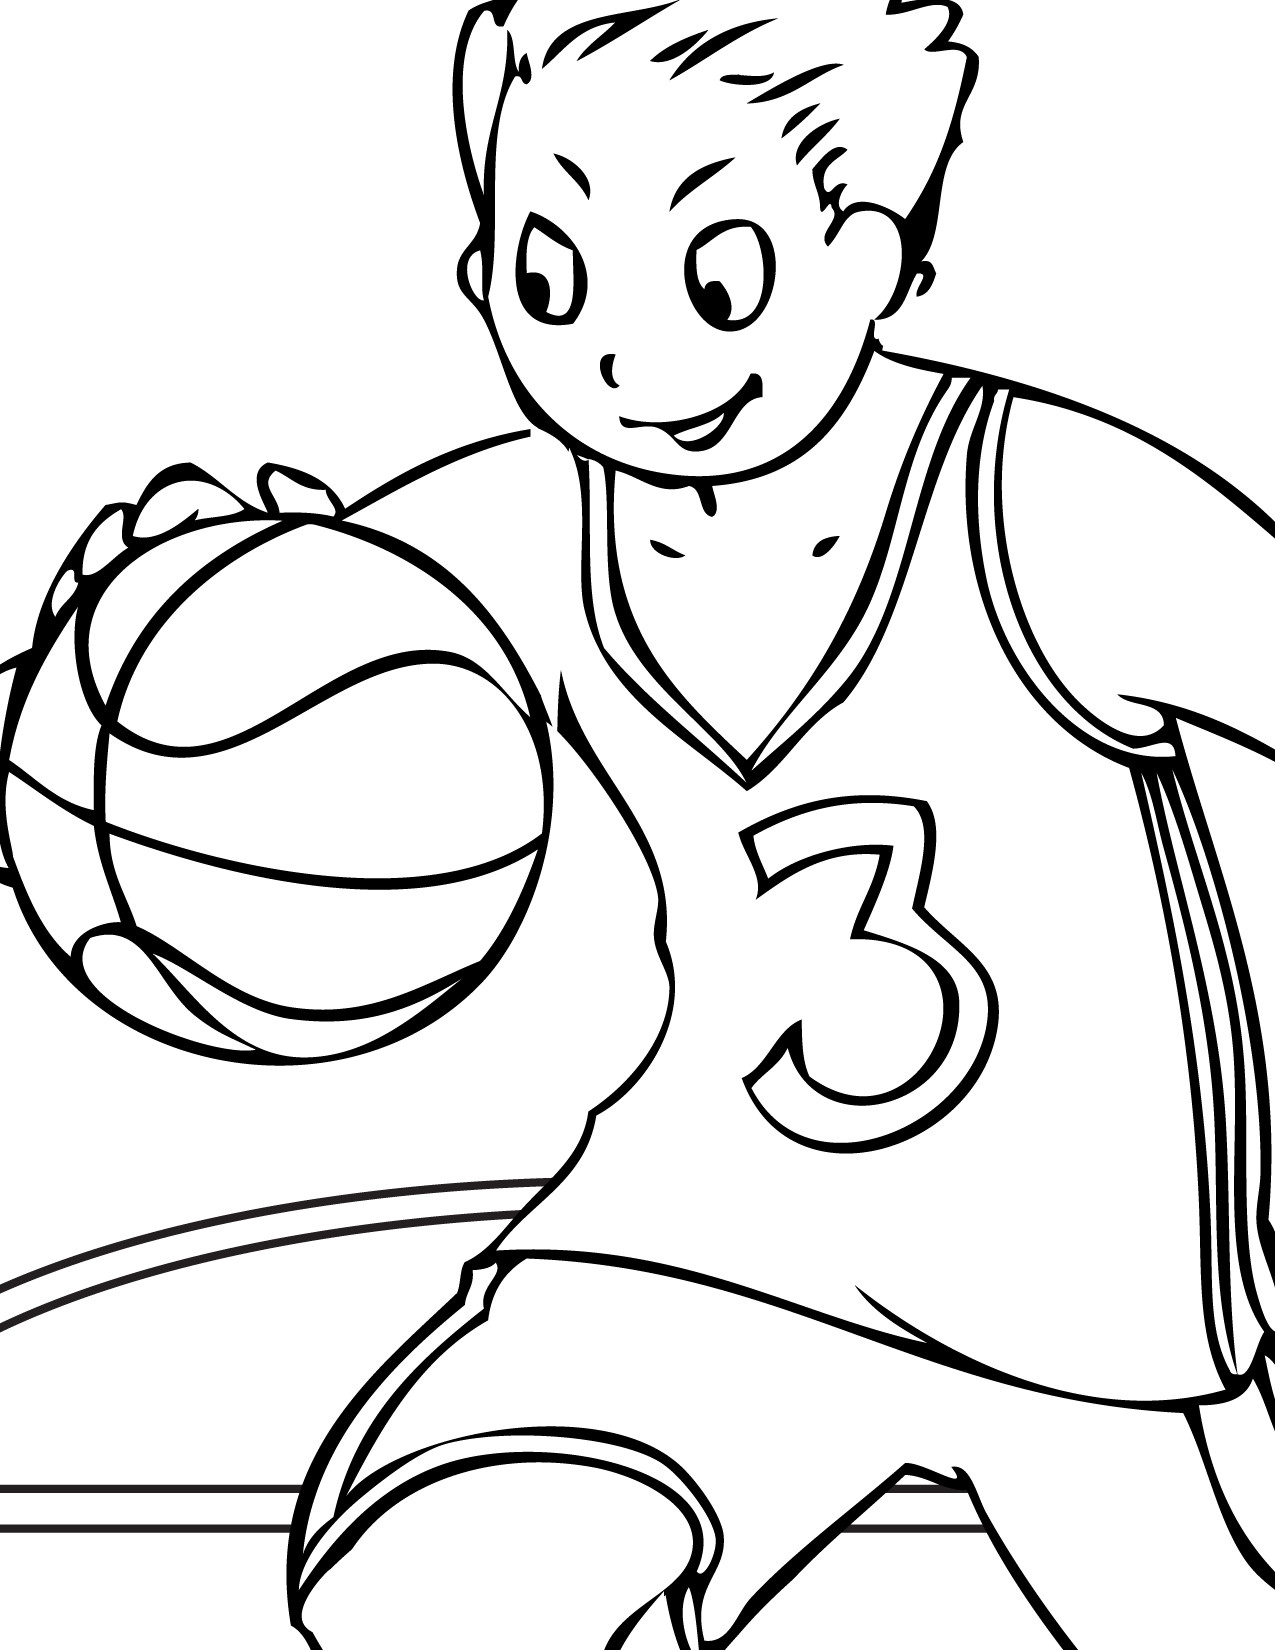 Free Printable Coloring Sheets For Kids
 Free Printable Volleyball Coloring Pages For Kids